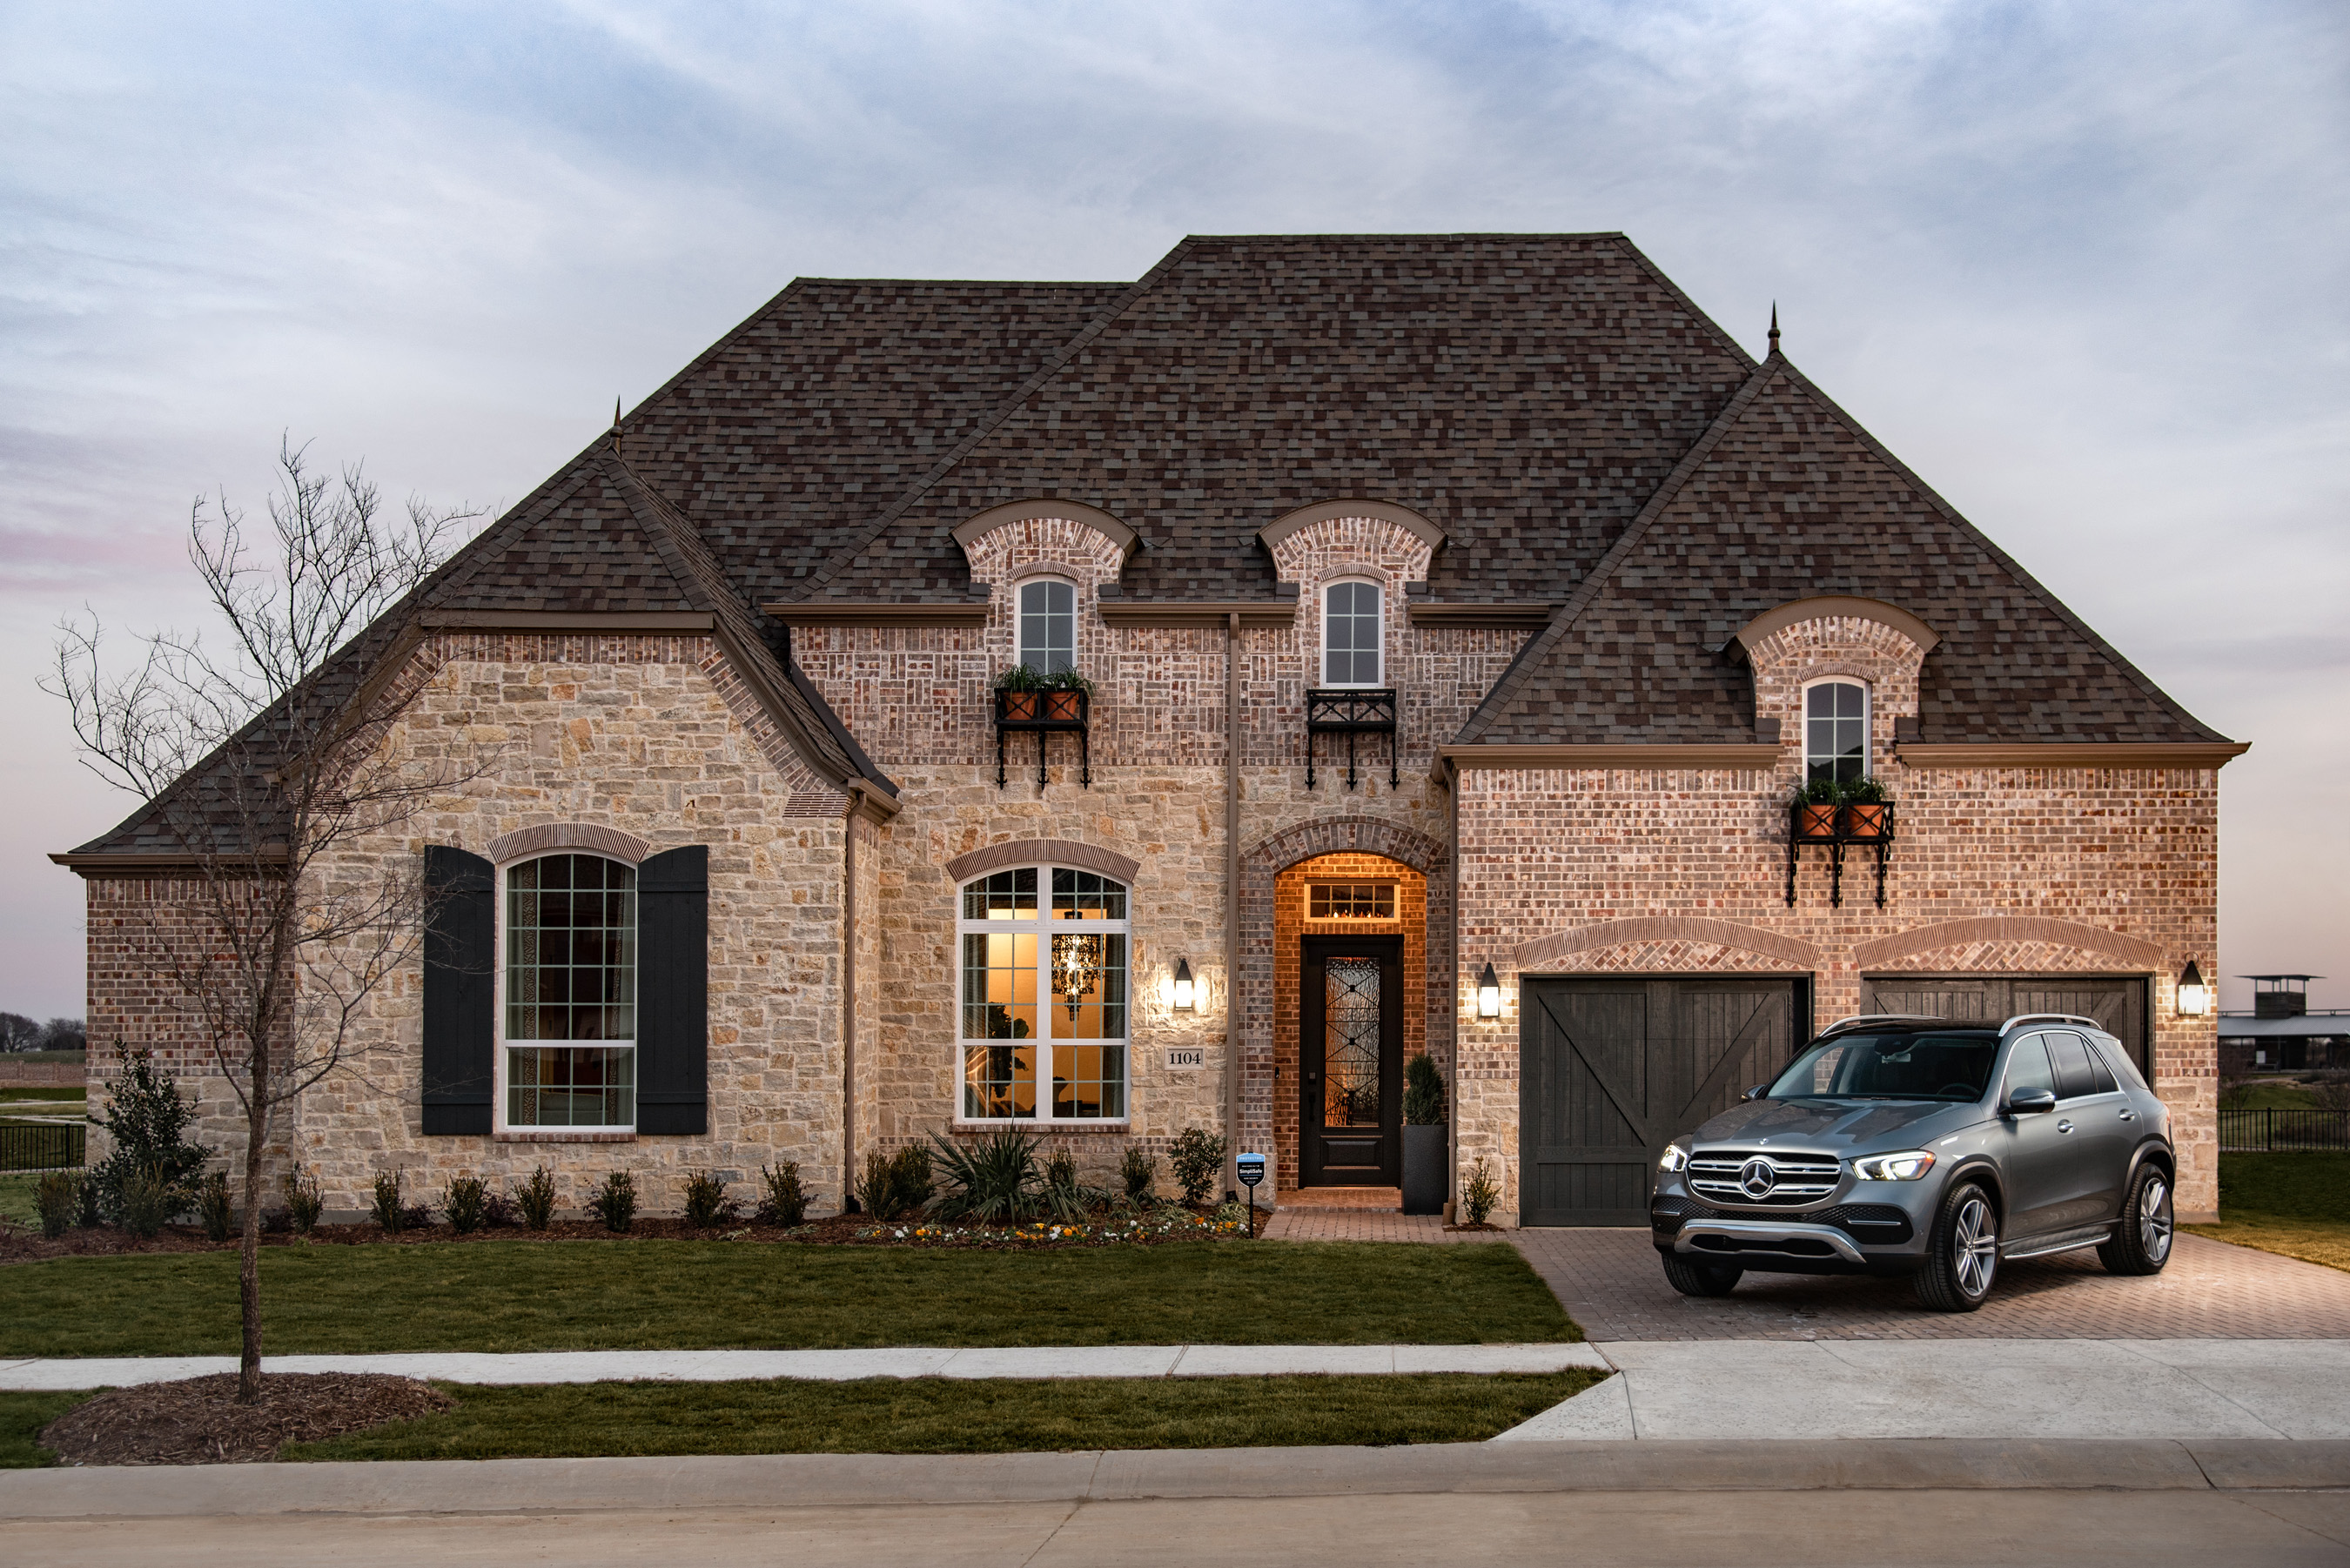 Take a Virtual Tour of HGTV Smart Home 2019 located in the DallasFort